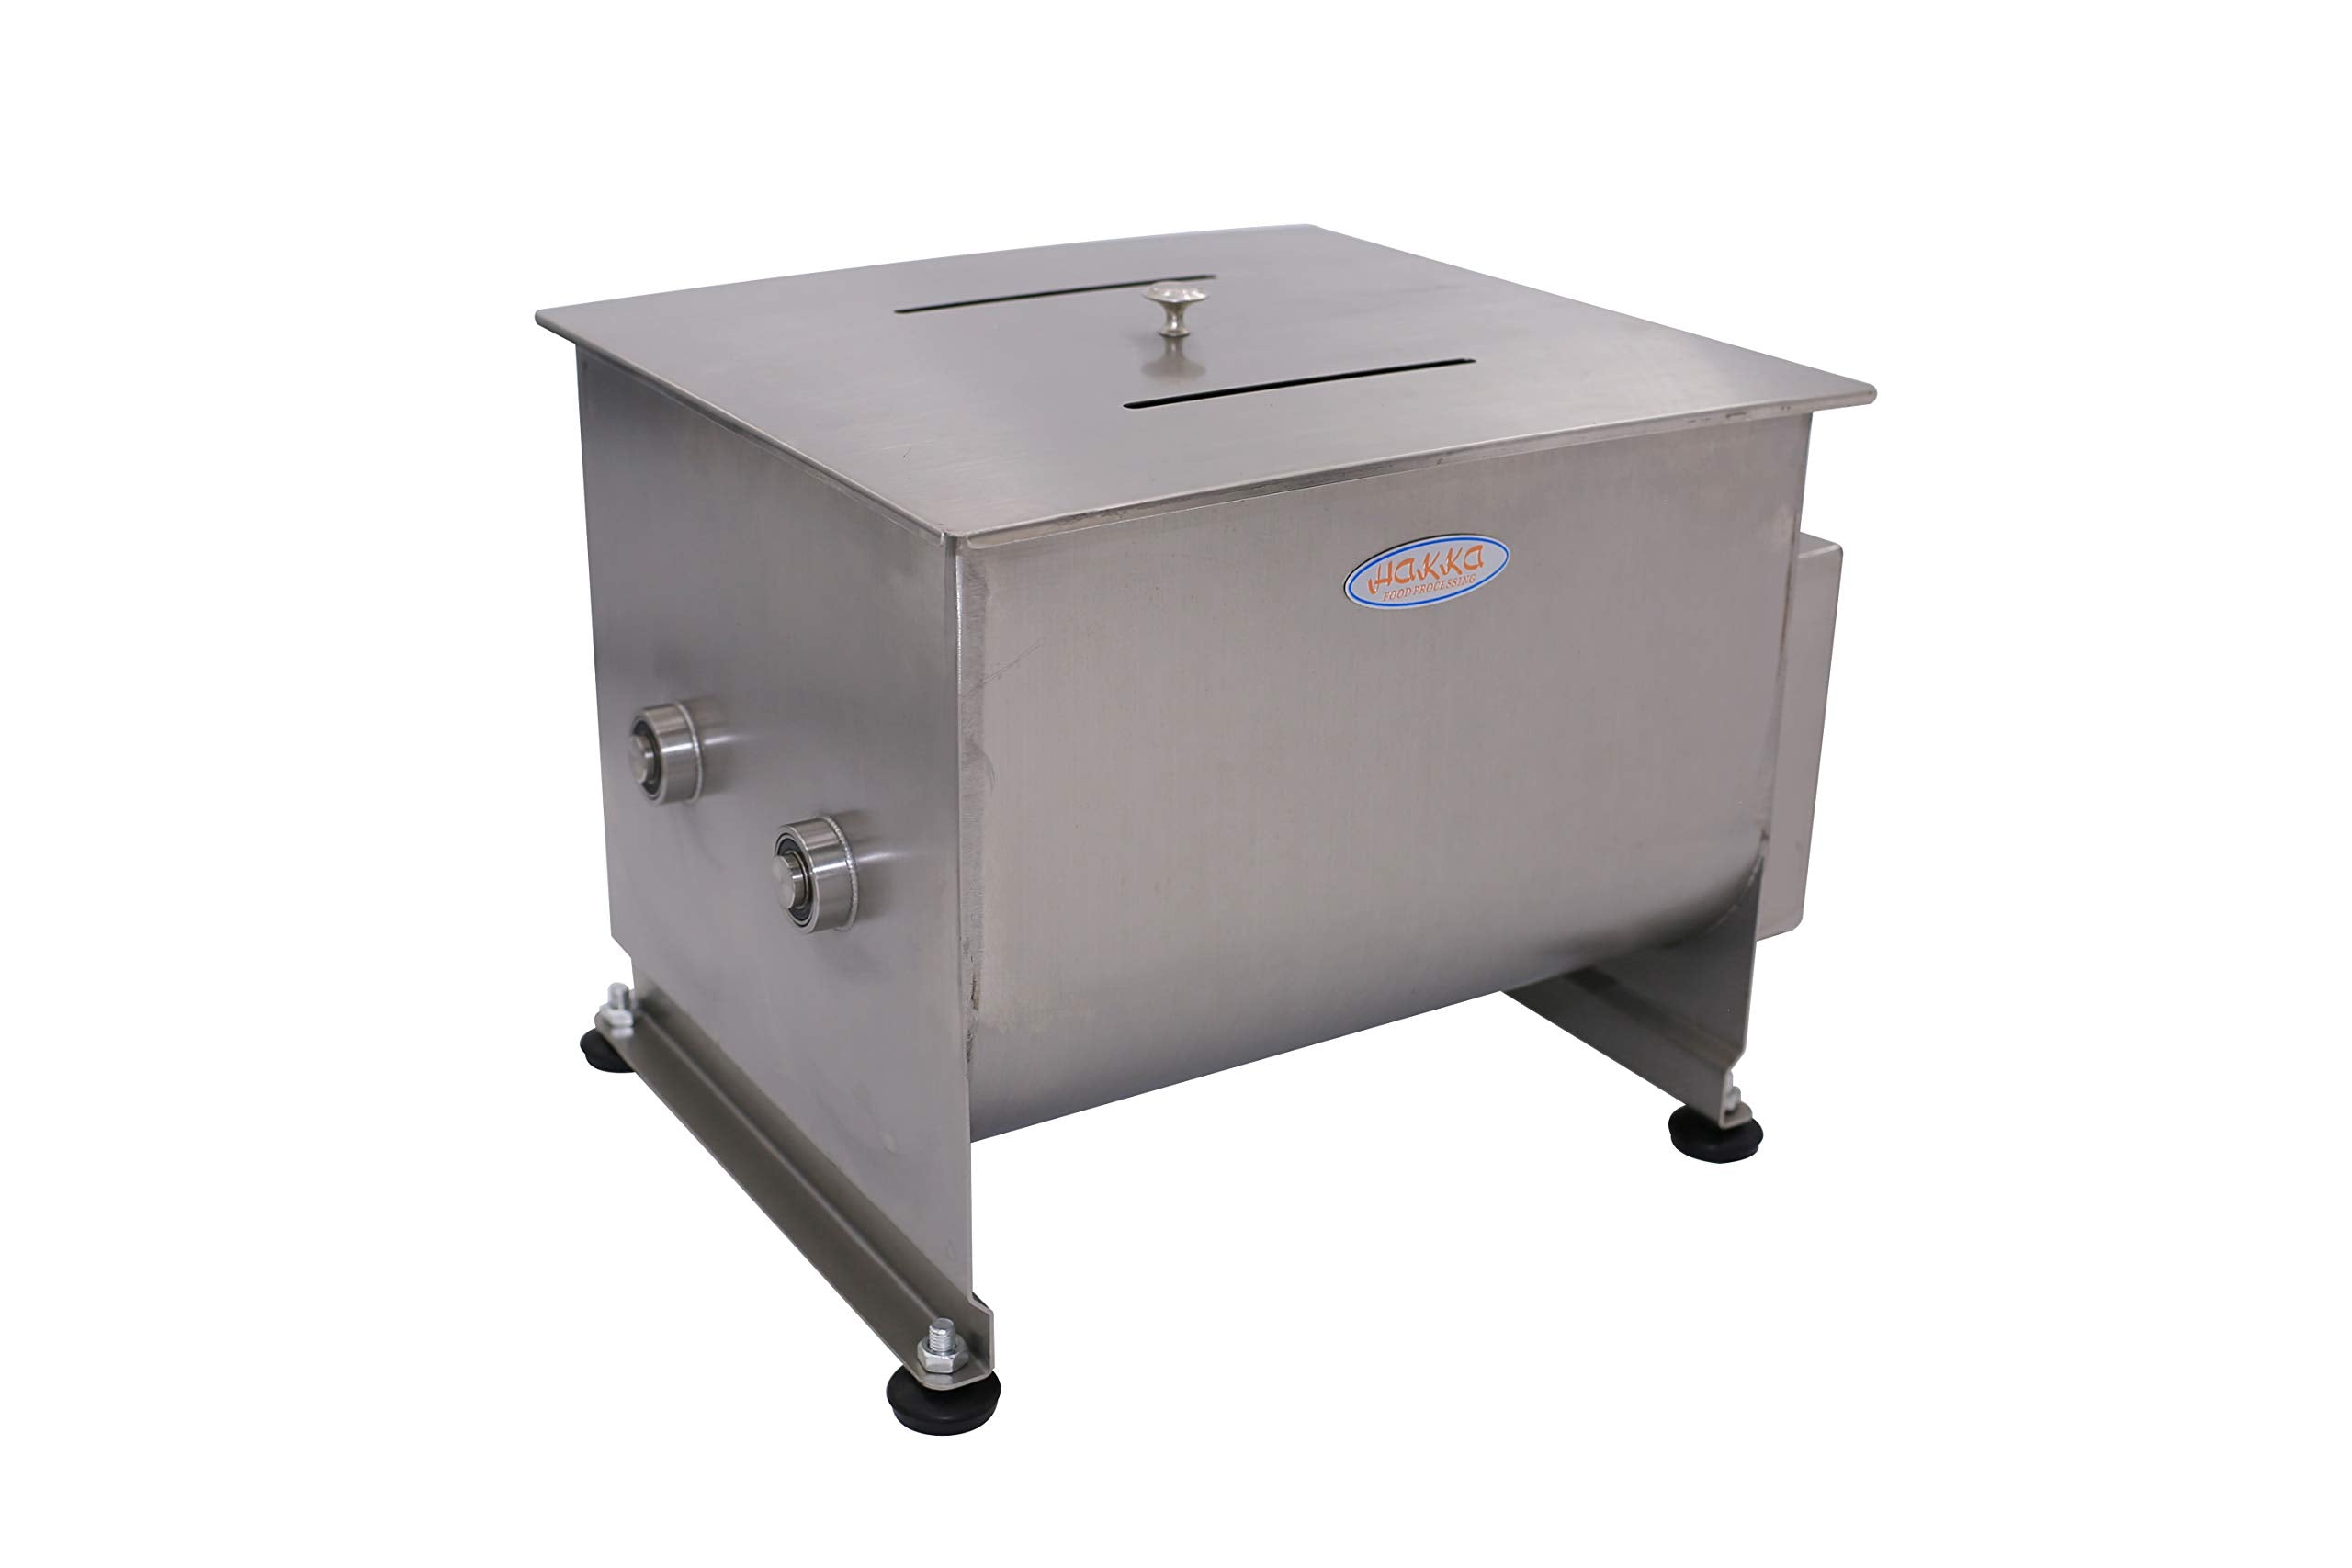 Hakka Brothers 30 pounds/20 Liter Double Axis Manual Meat Mixer